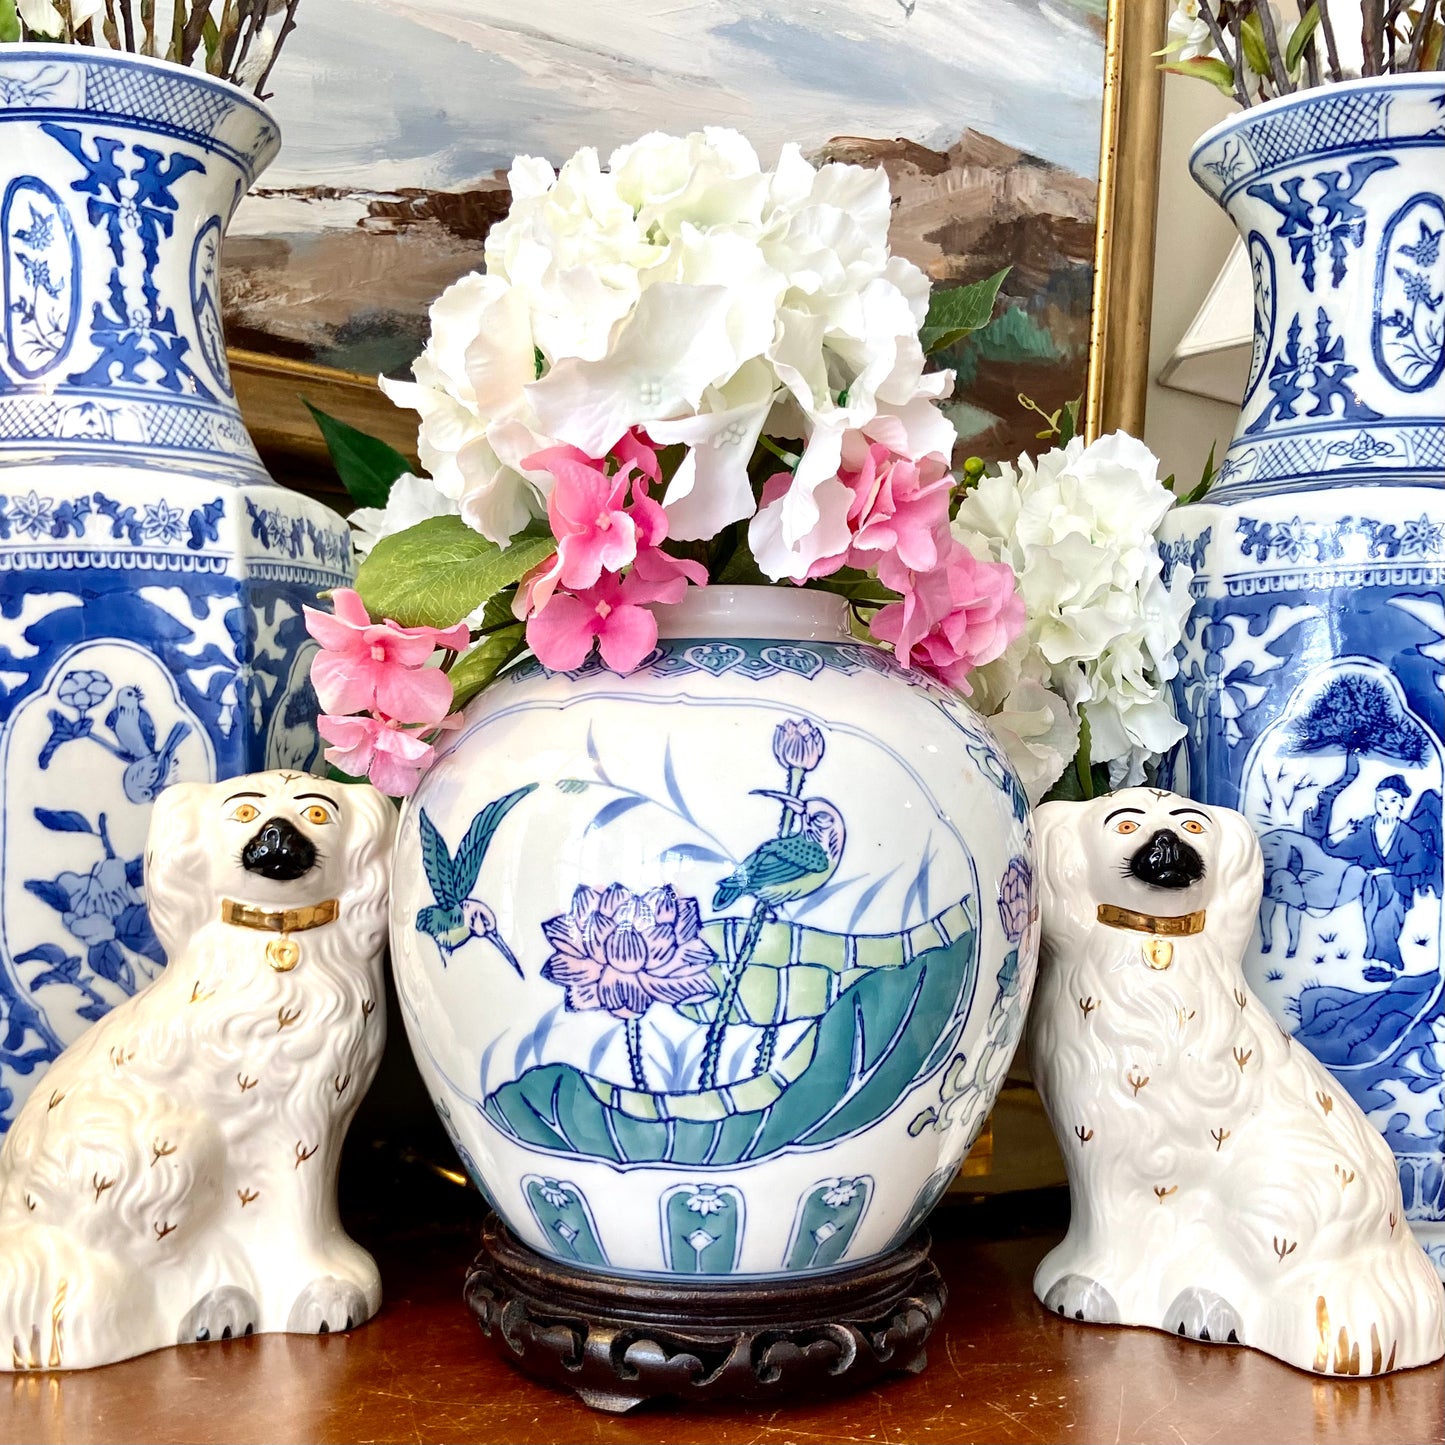 Massive chinoiserie ginger jar with bird and botanical design